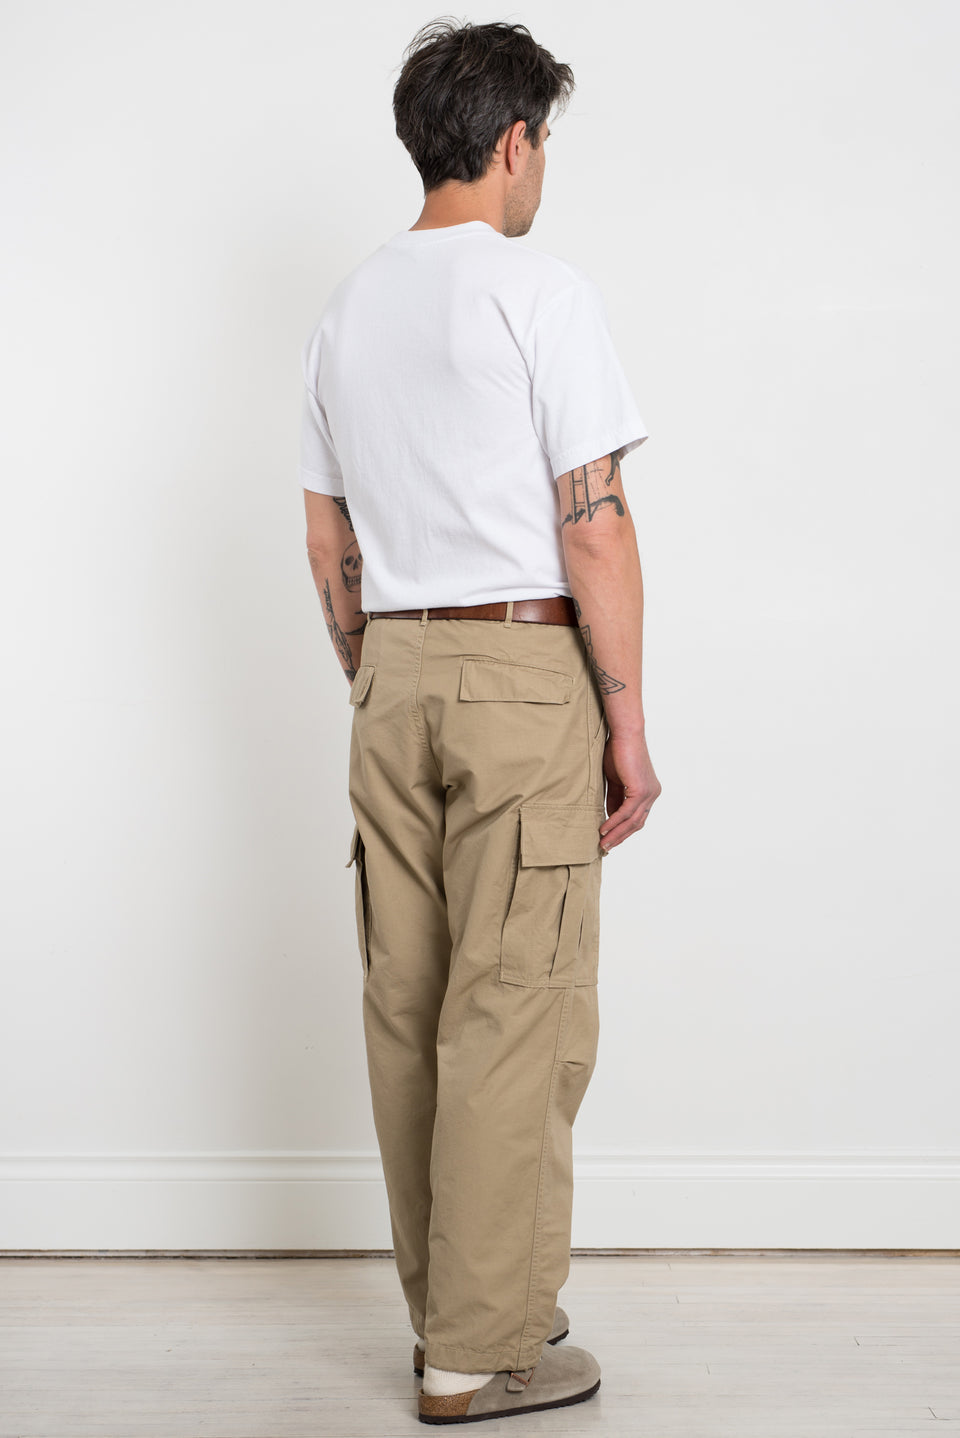 OrSlow 23SS SS23 03-V5260RIP-67 Vintage Fit 6 Pocket Cargo Pants Beige  Calculus Victoria BC Canada